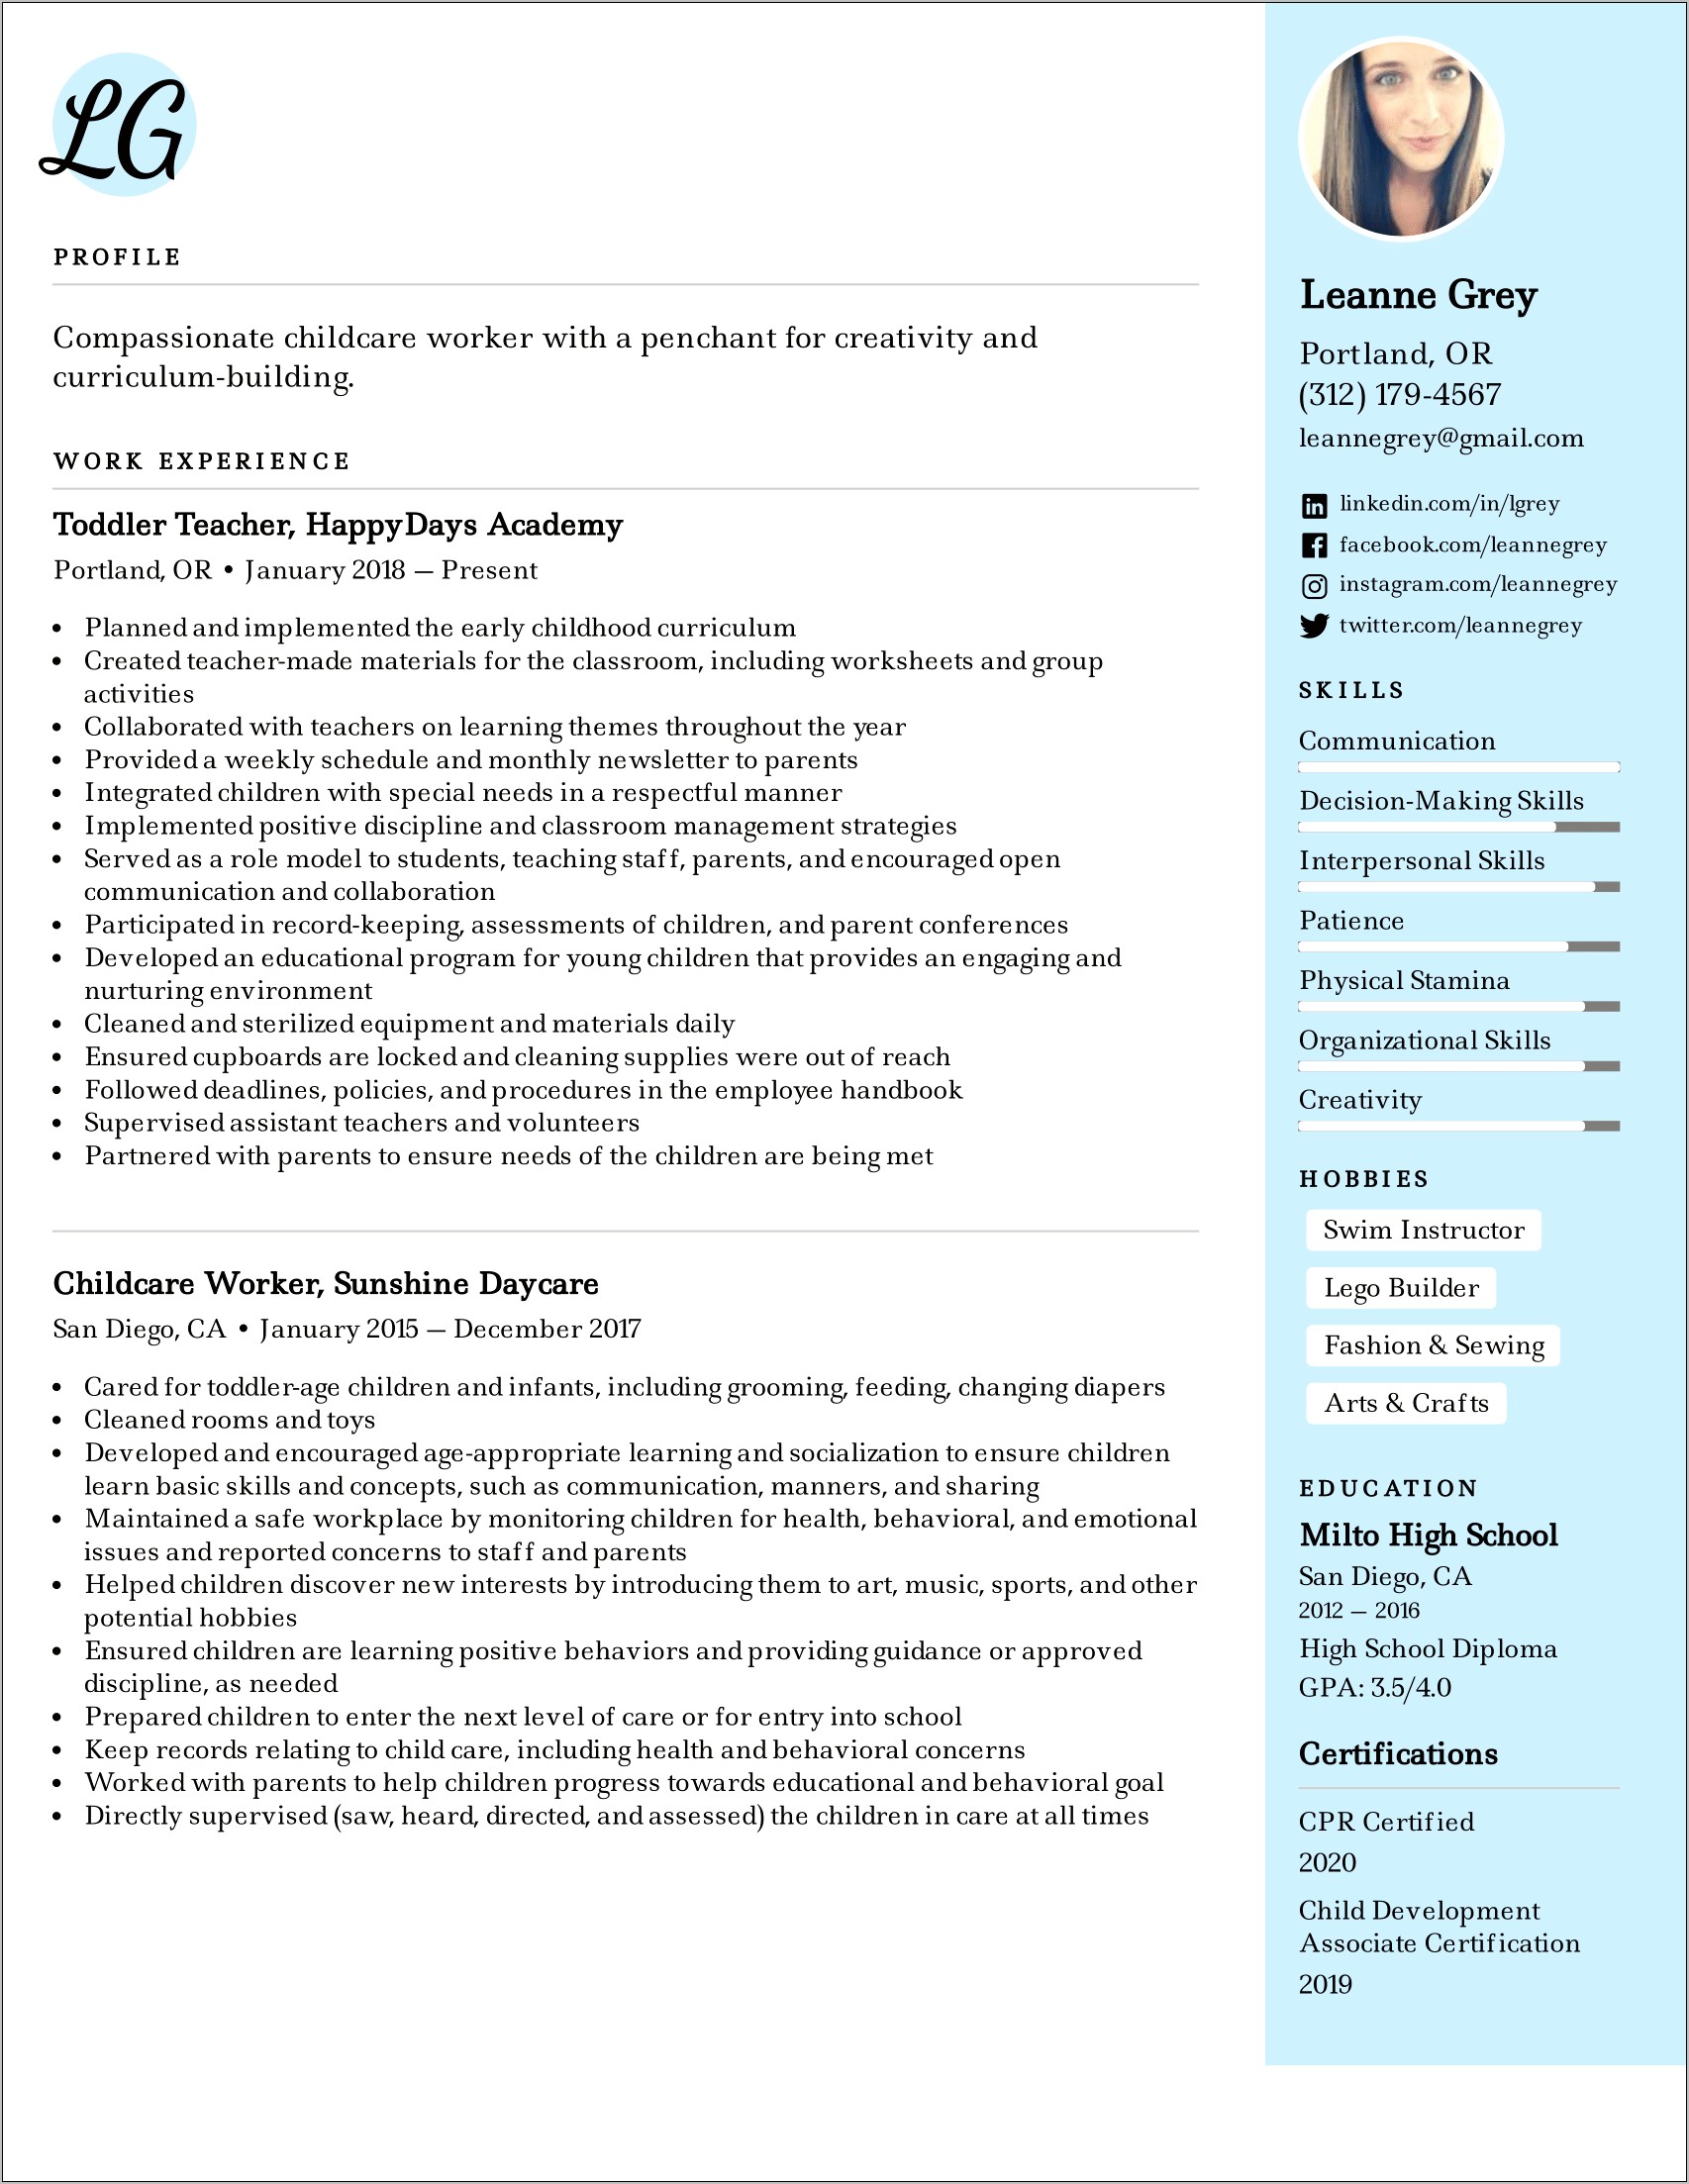 Resume Examples Skills And Abilities Section